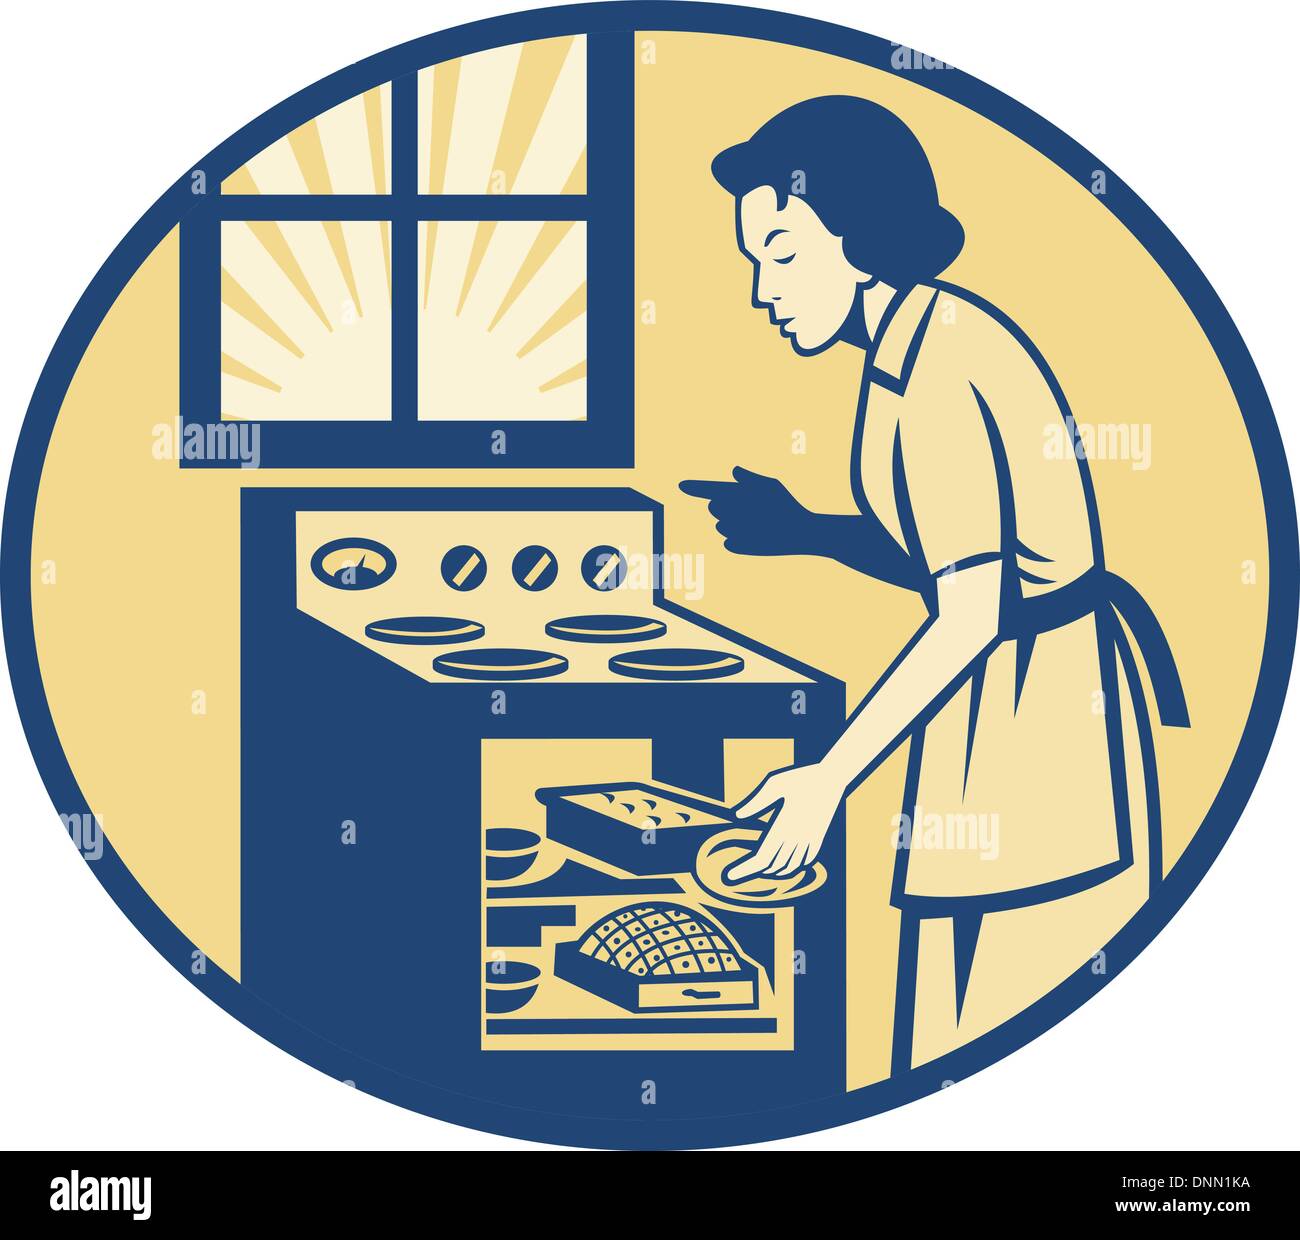 Illustration of a housewife baker baking pastry roasting meat in oven stove done in retro style set inside oval. Stock Vector